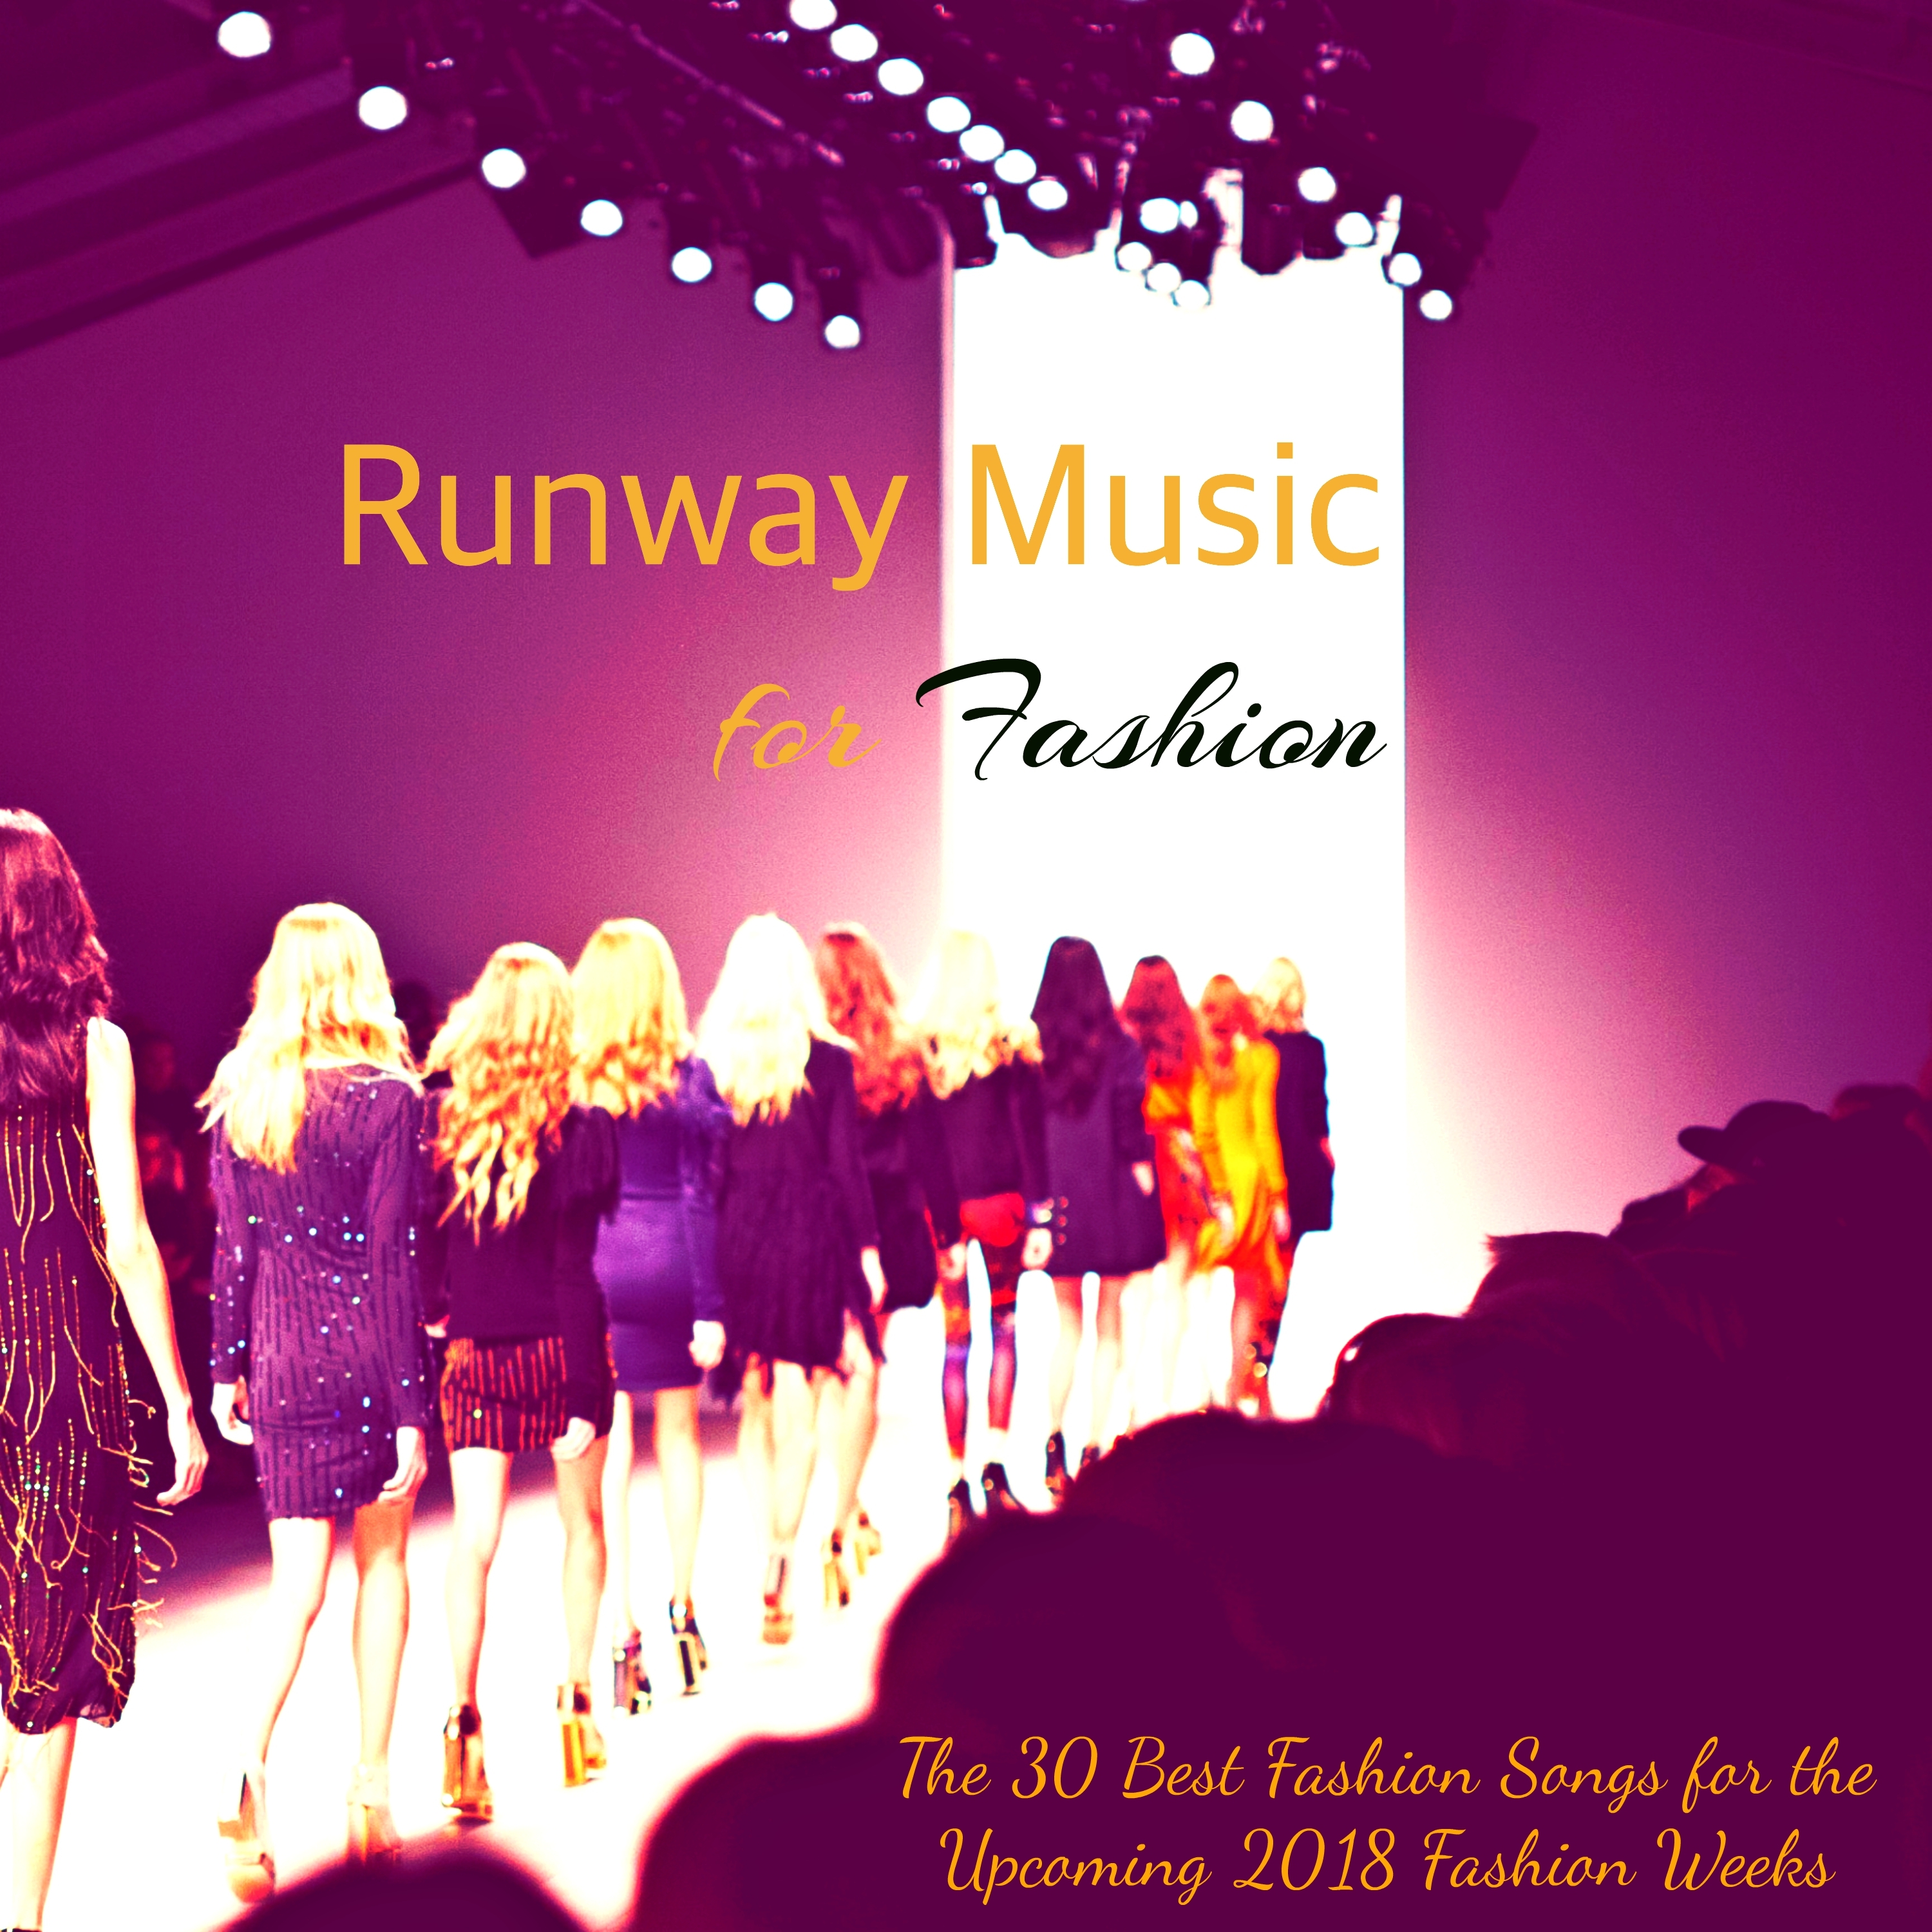 Runway Music for Fashion - The 30 Best Fashion Songs for the Upcoming 2018 Fashion Weeks